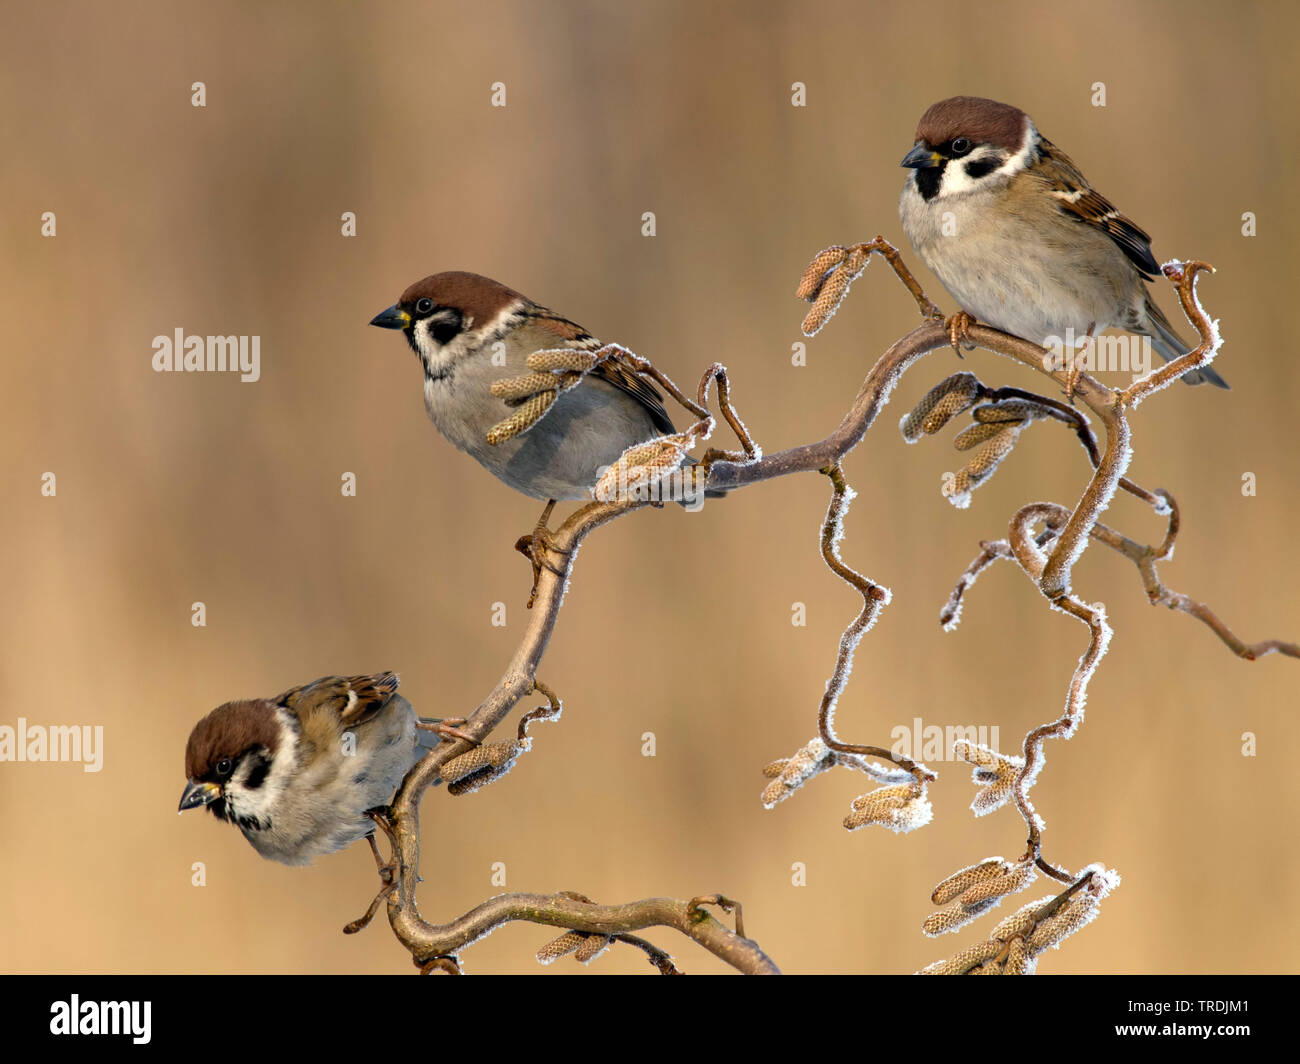 Eurasian tree sparrow (Passer montanus), on a hzel with roar frost, Netherland, Almere Stock Photo